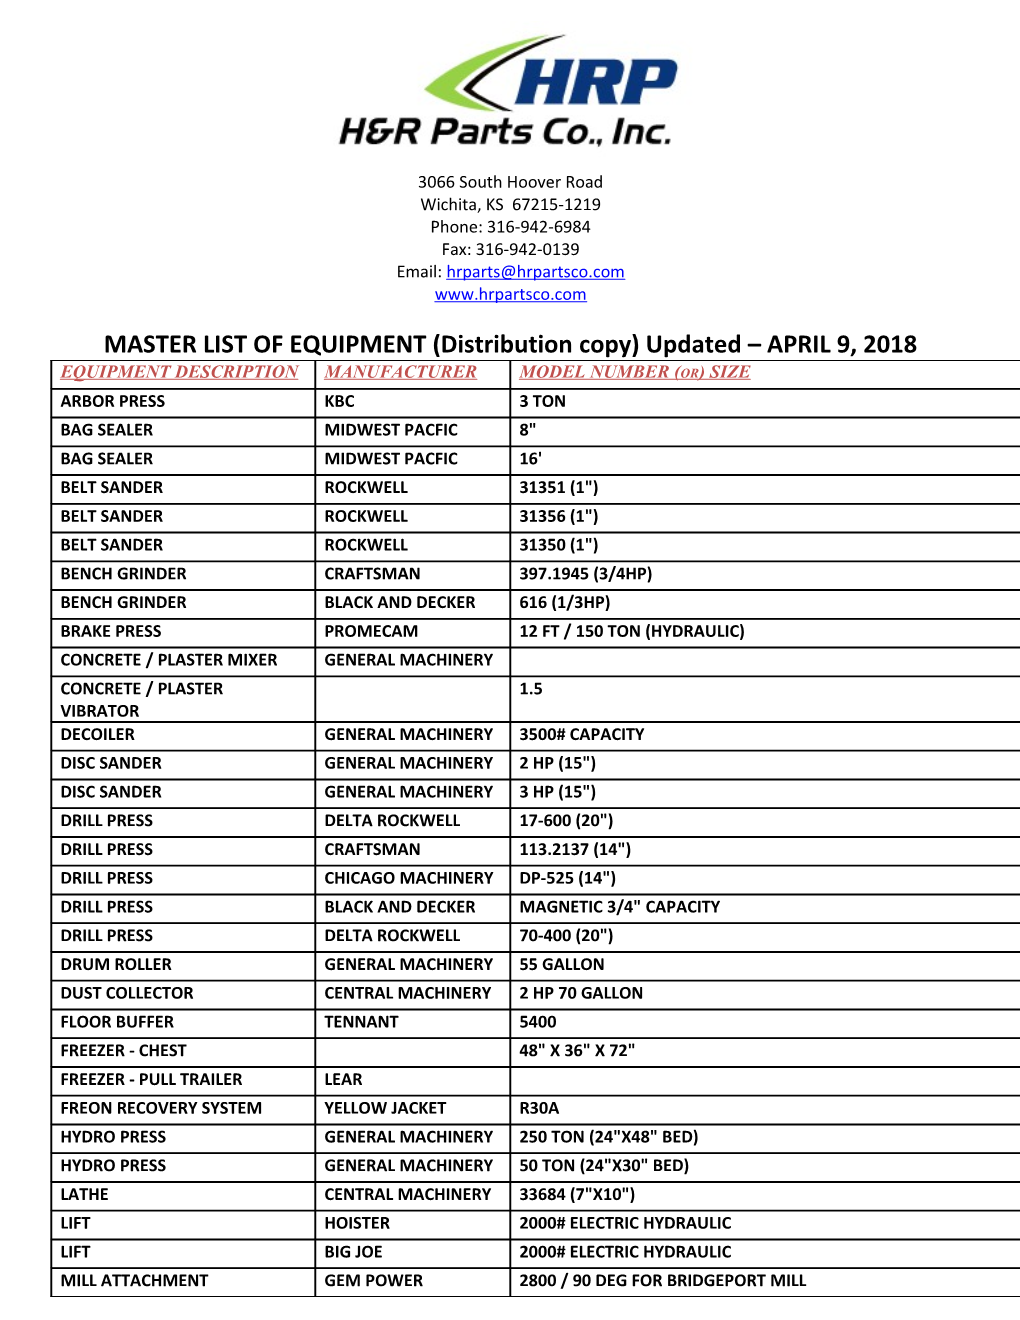 MASTER LIST of EQUIPMENT (Distribution Copy)Updated APRIL 9, 2018